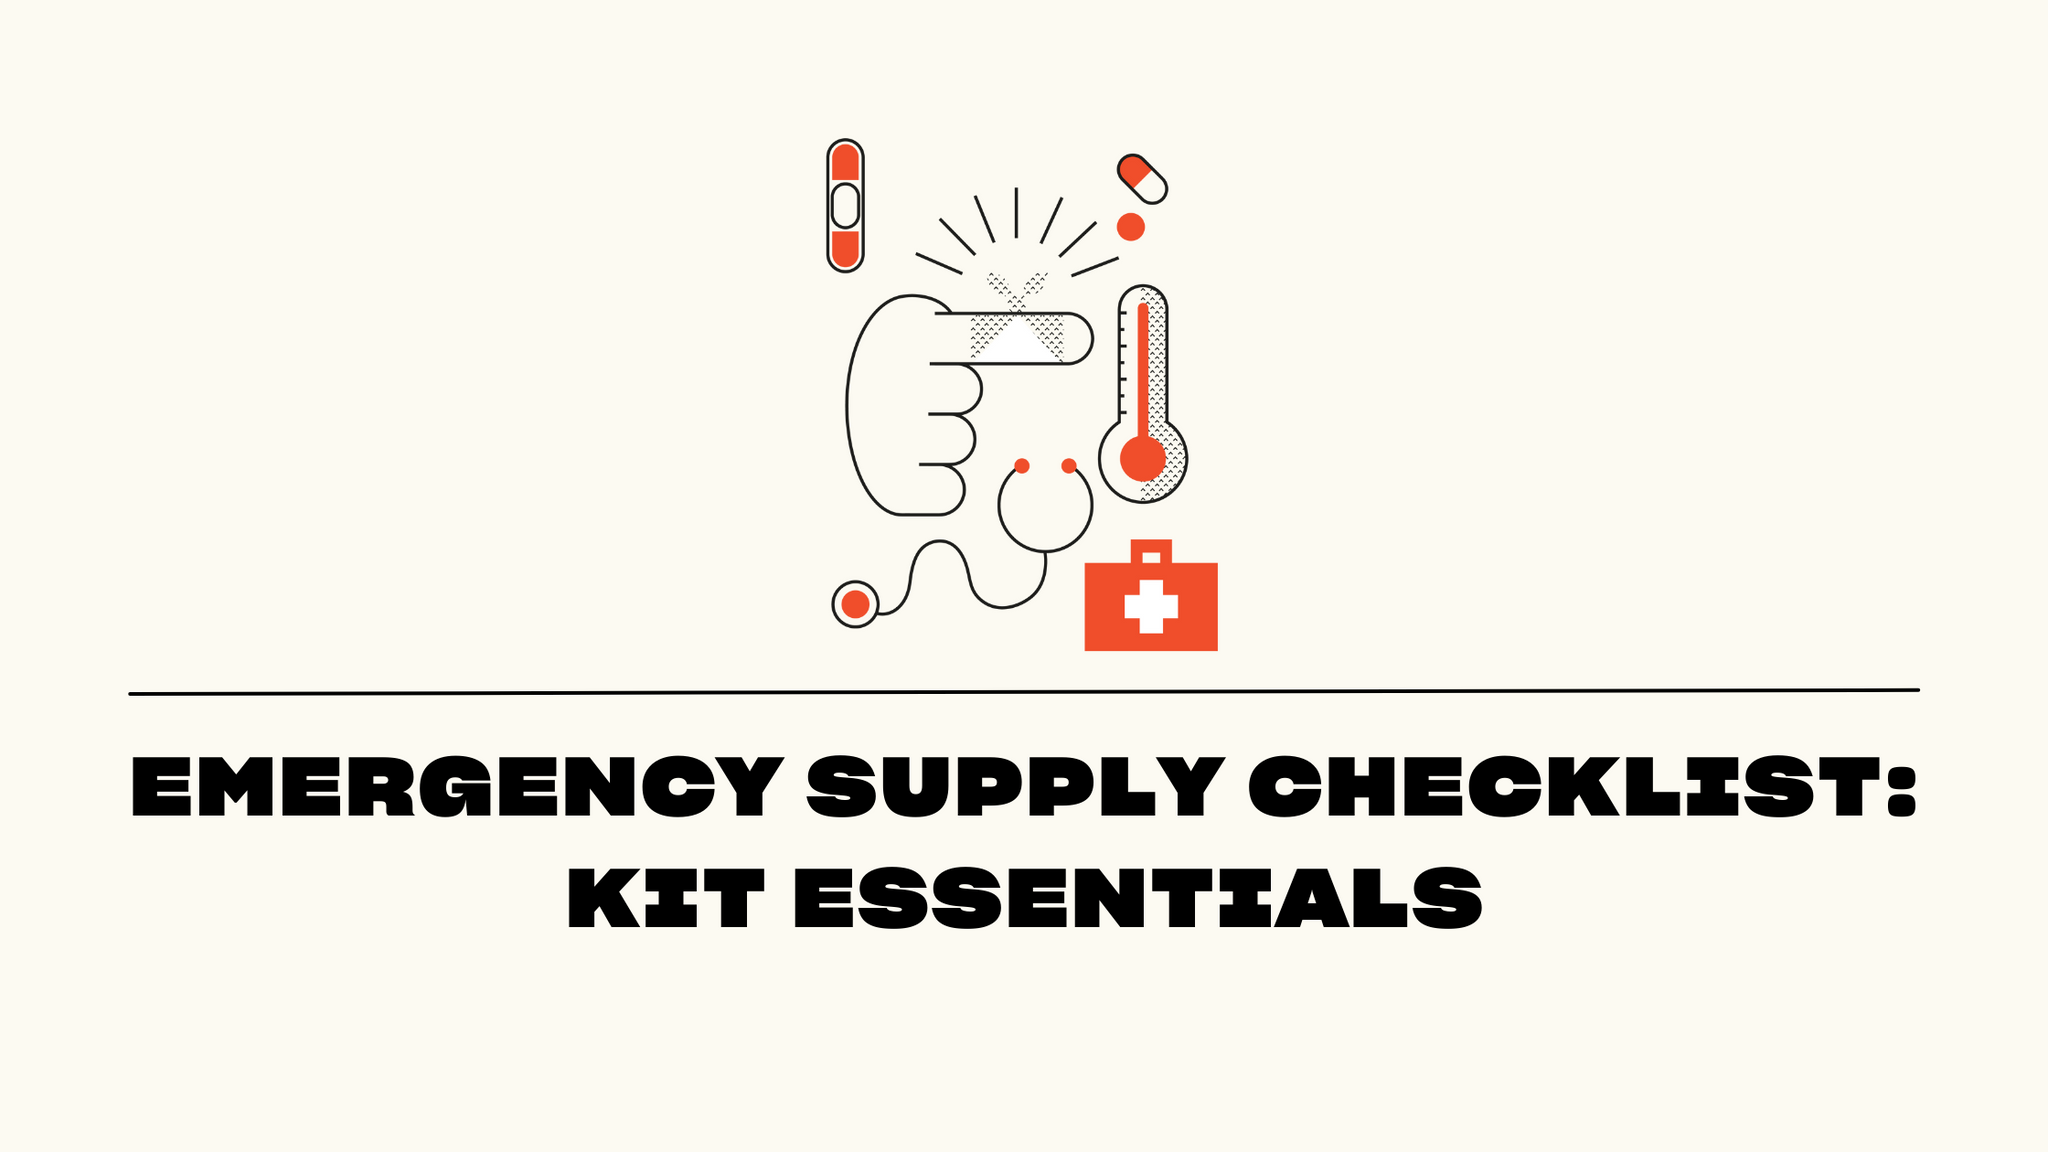 Emergency Supply Packing List